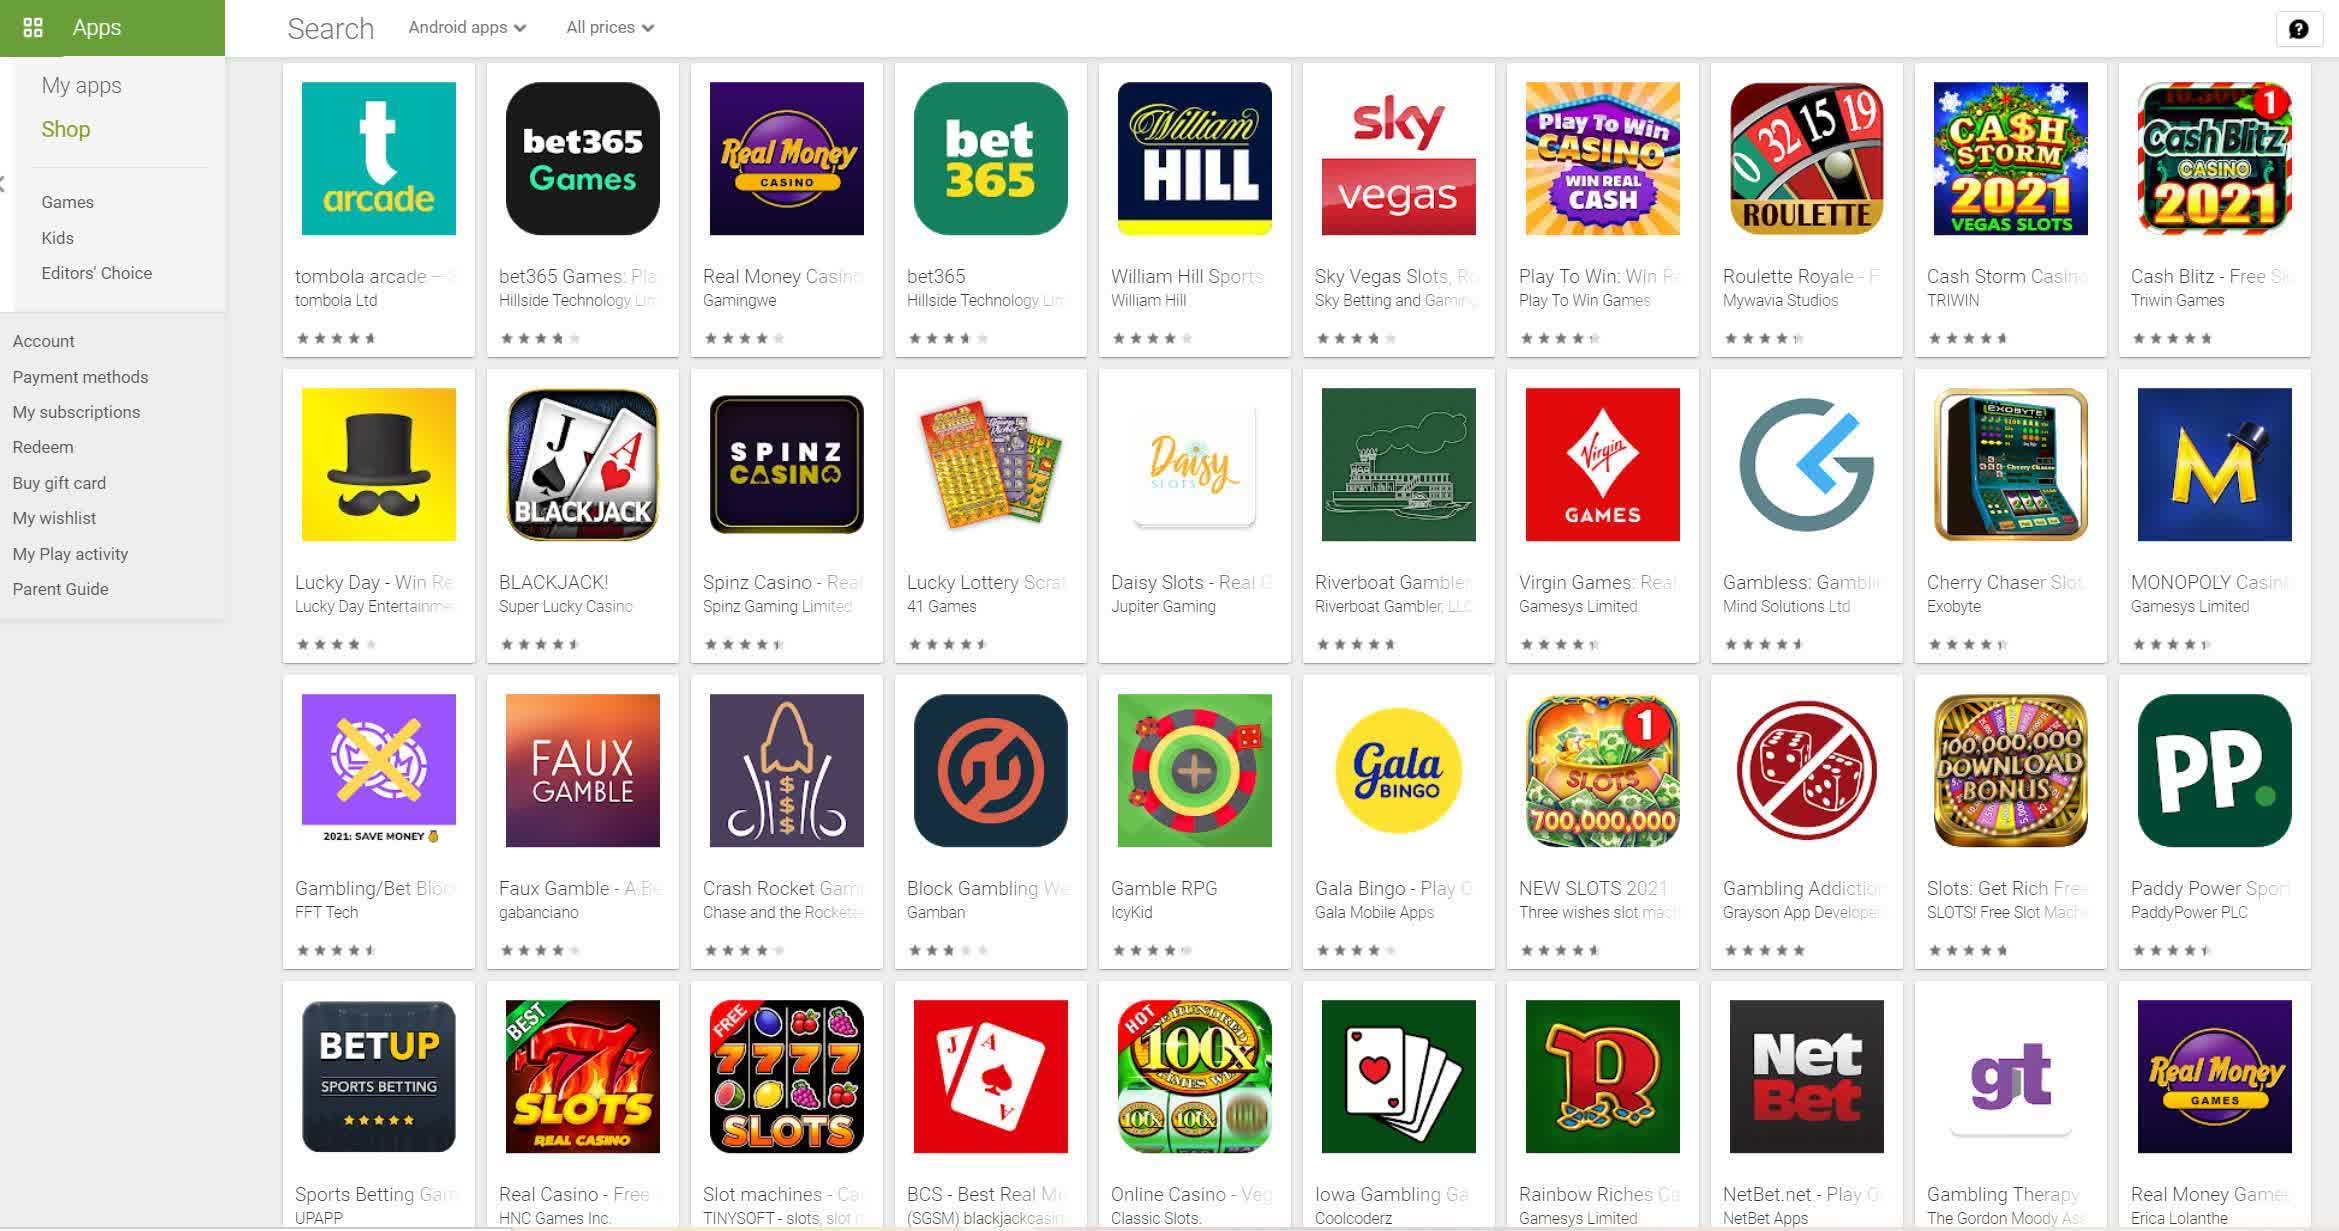 5 Ways You Can Get More Online Cricket Betting App While Spending Less